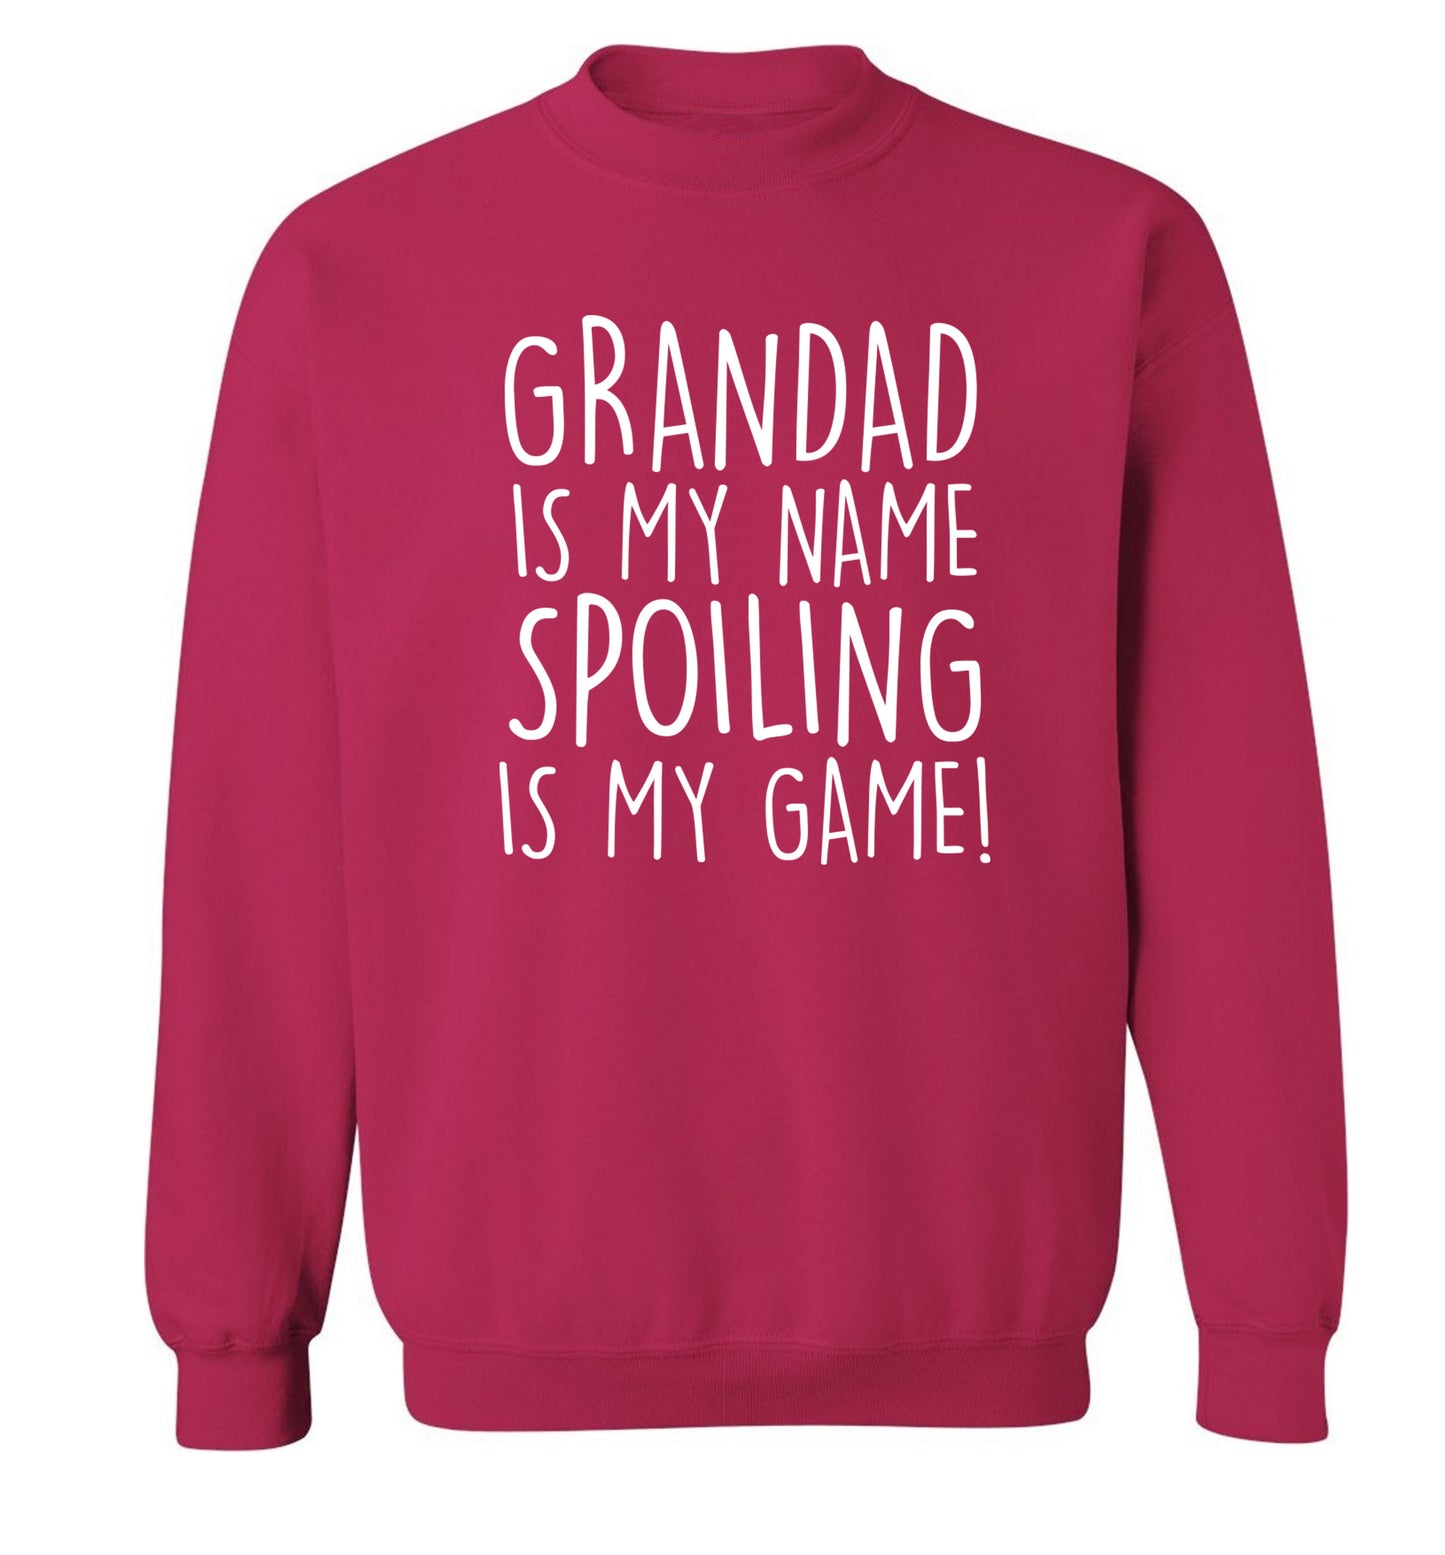 Grandad is my name, spoiling is my game Adult's unisex pink Sweater 2XL